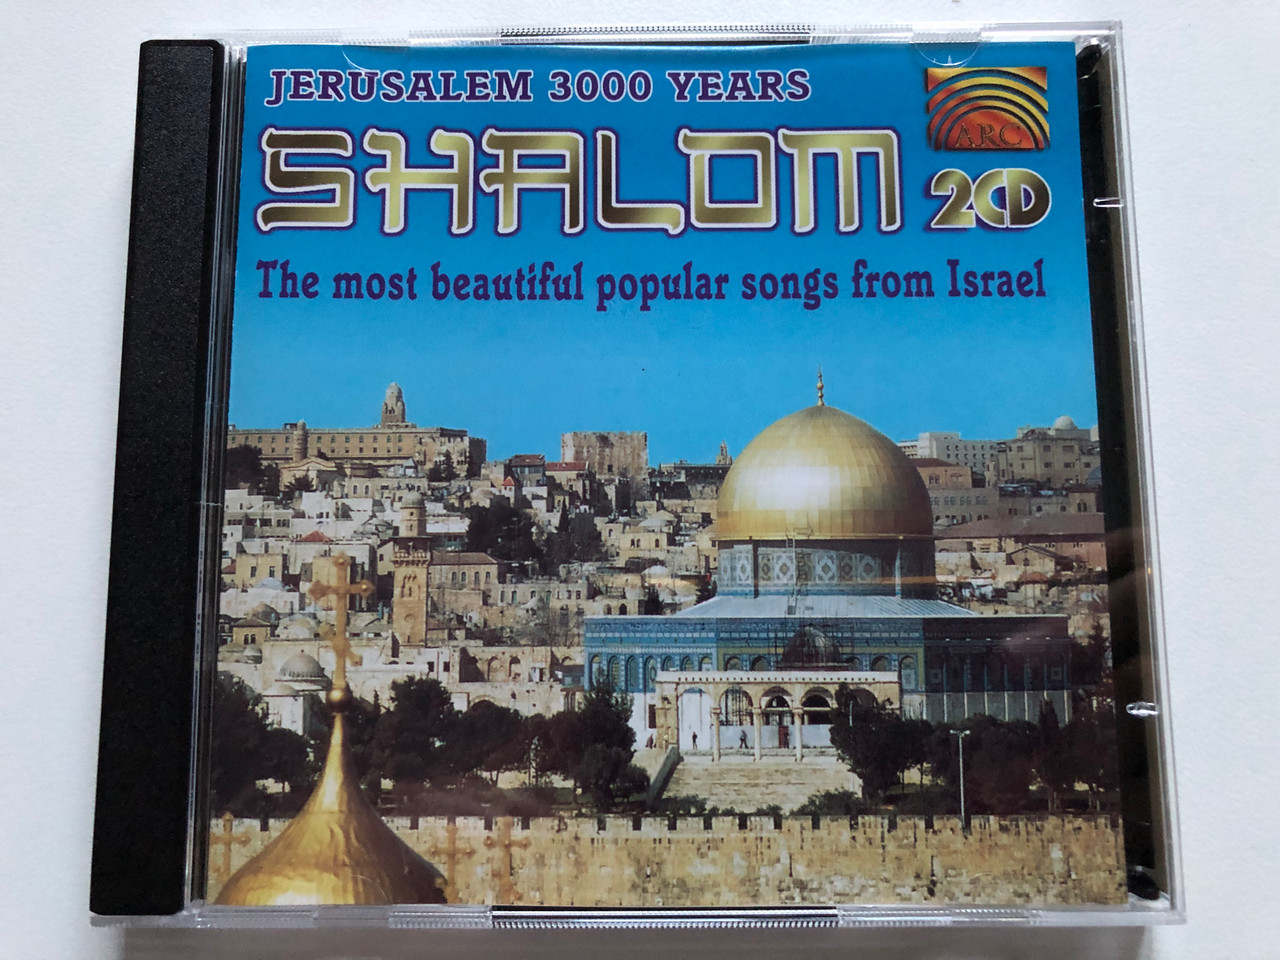 https://cdn11.bigcommerce.com/s-62bdpkt7pb/products/0/images/319768/Shalom_Jerusalem_3000_Years_-_The_Most_Beautiful_Popular_Songs_From_Israel_ARC_Music_2x_Audio_CD_1996_EUCD_0219_1__38770.1704273945.1280.1280.JPG?c=2